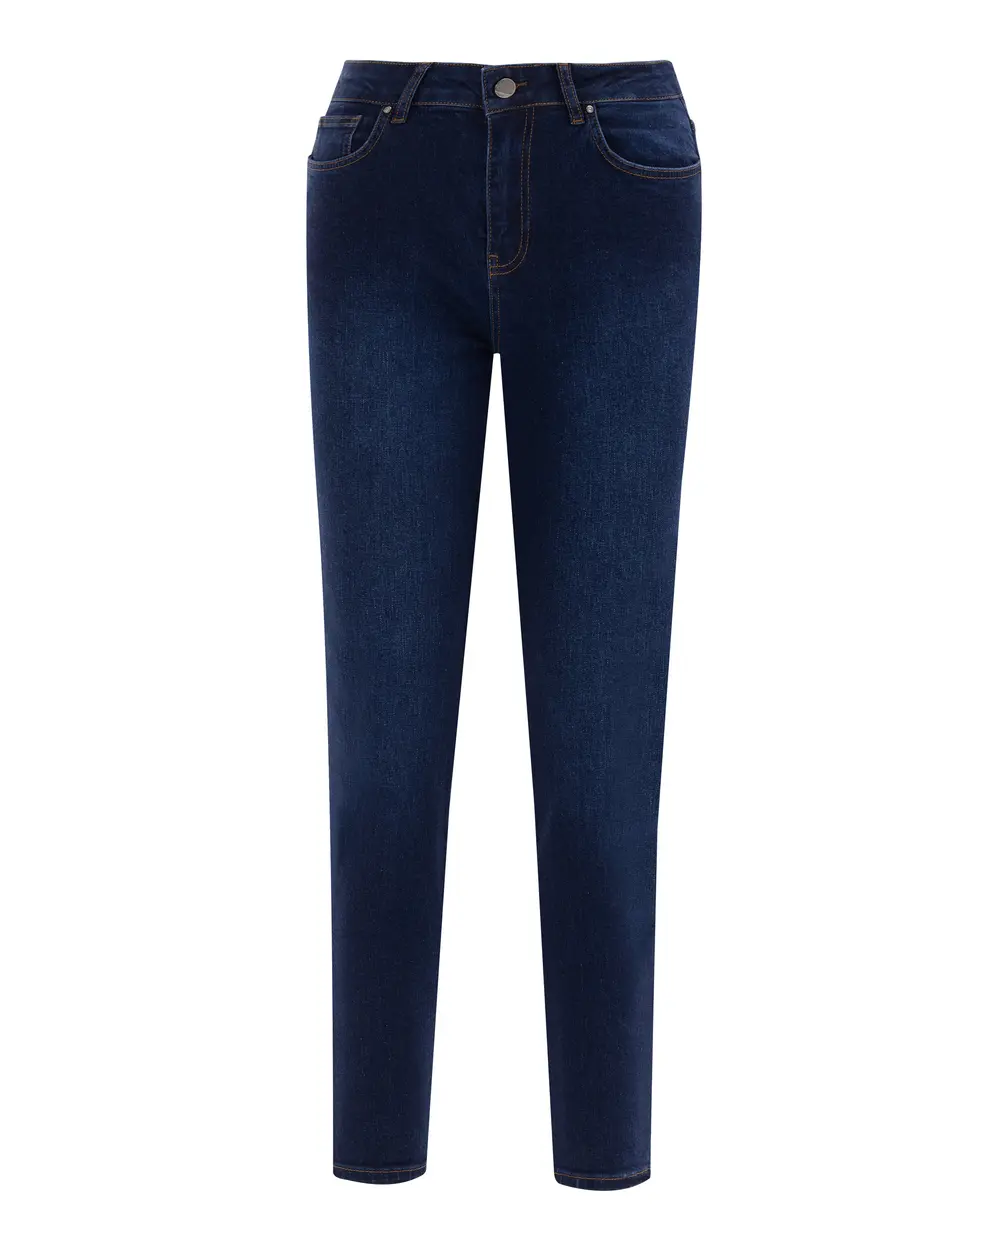 Jean Pants with Buttoned Pocket Detail